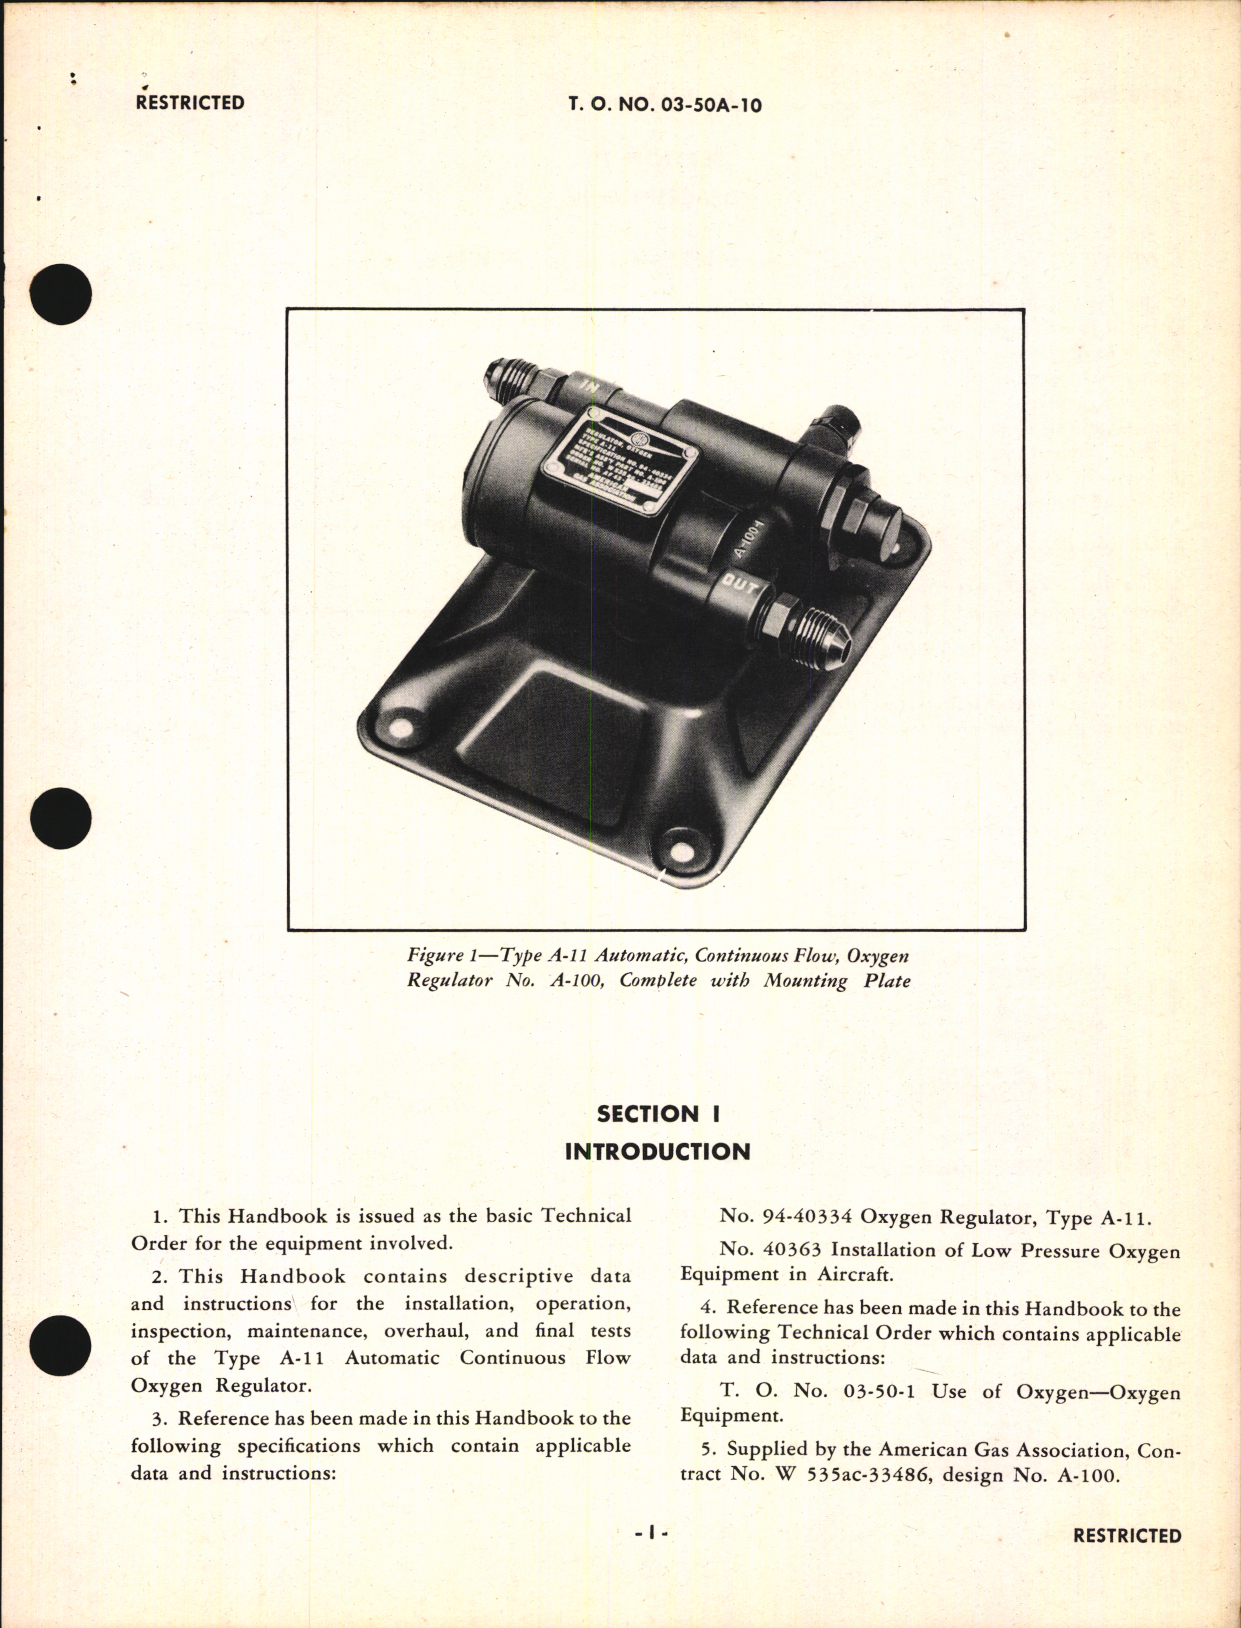 Sample page 5 from AirCorps Library document: Handbook of Instructions with Parts Catalog for Type A-11 Oxygen Regulators